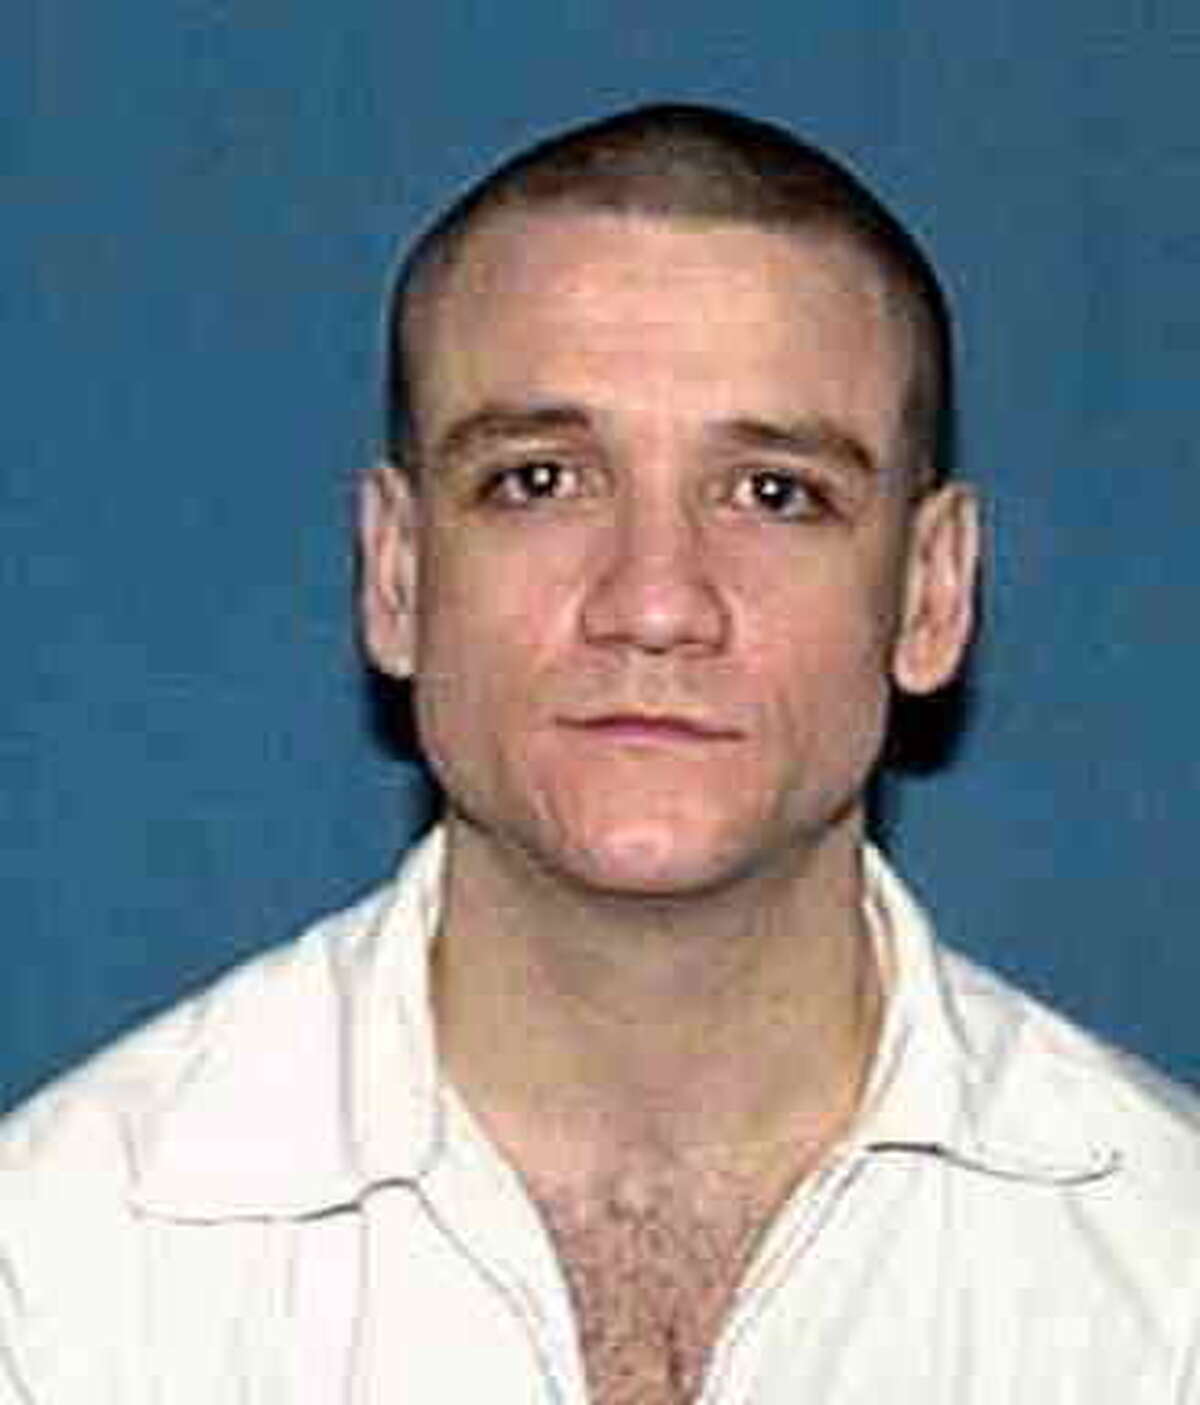 Terry Sillers has been an Aryan Brotherhood of Texas general. He is now in prison.